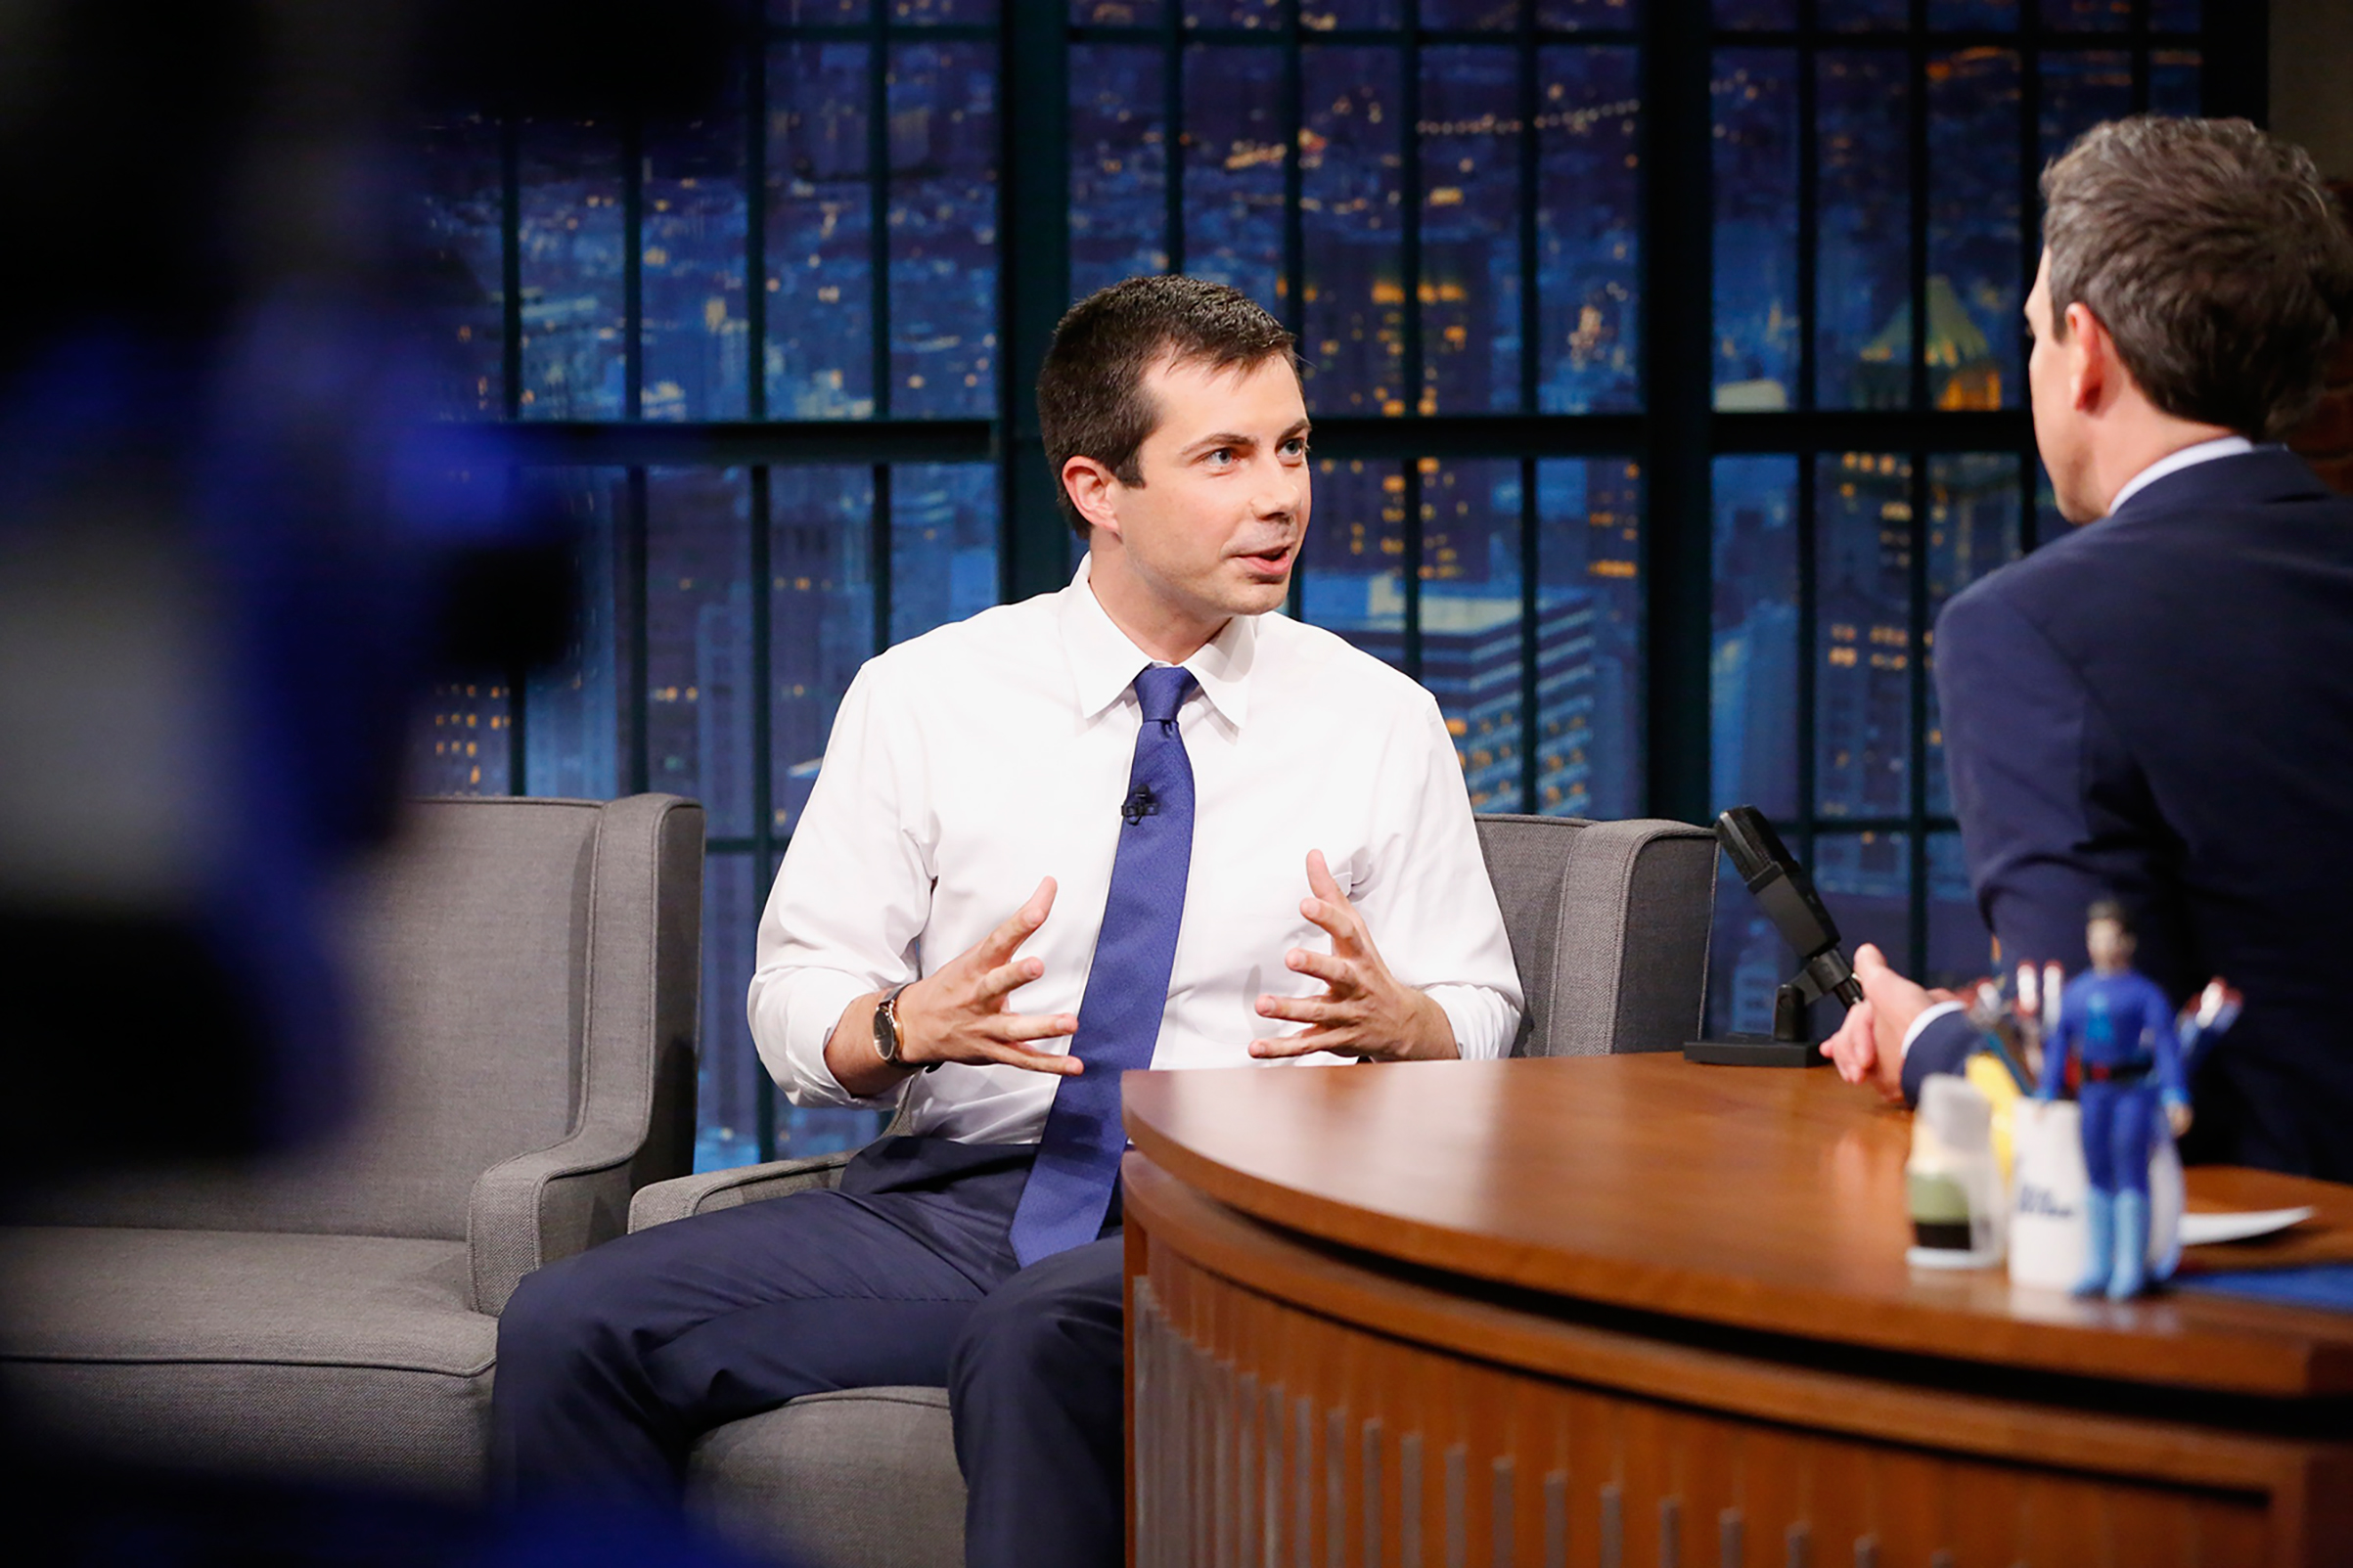 Pete Buttigieg - The 35-year-old, pictured here on Late Night with Seth Meyers, says his view of national security was shaped by serving in Afghanistan Lloyd Bishop—NBC/NBCU/Getty Images (Lloyd Bishop—NBC/NBCU/Getty Images)